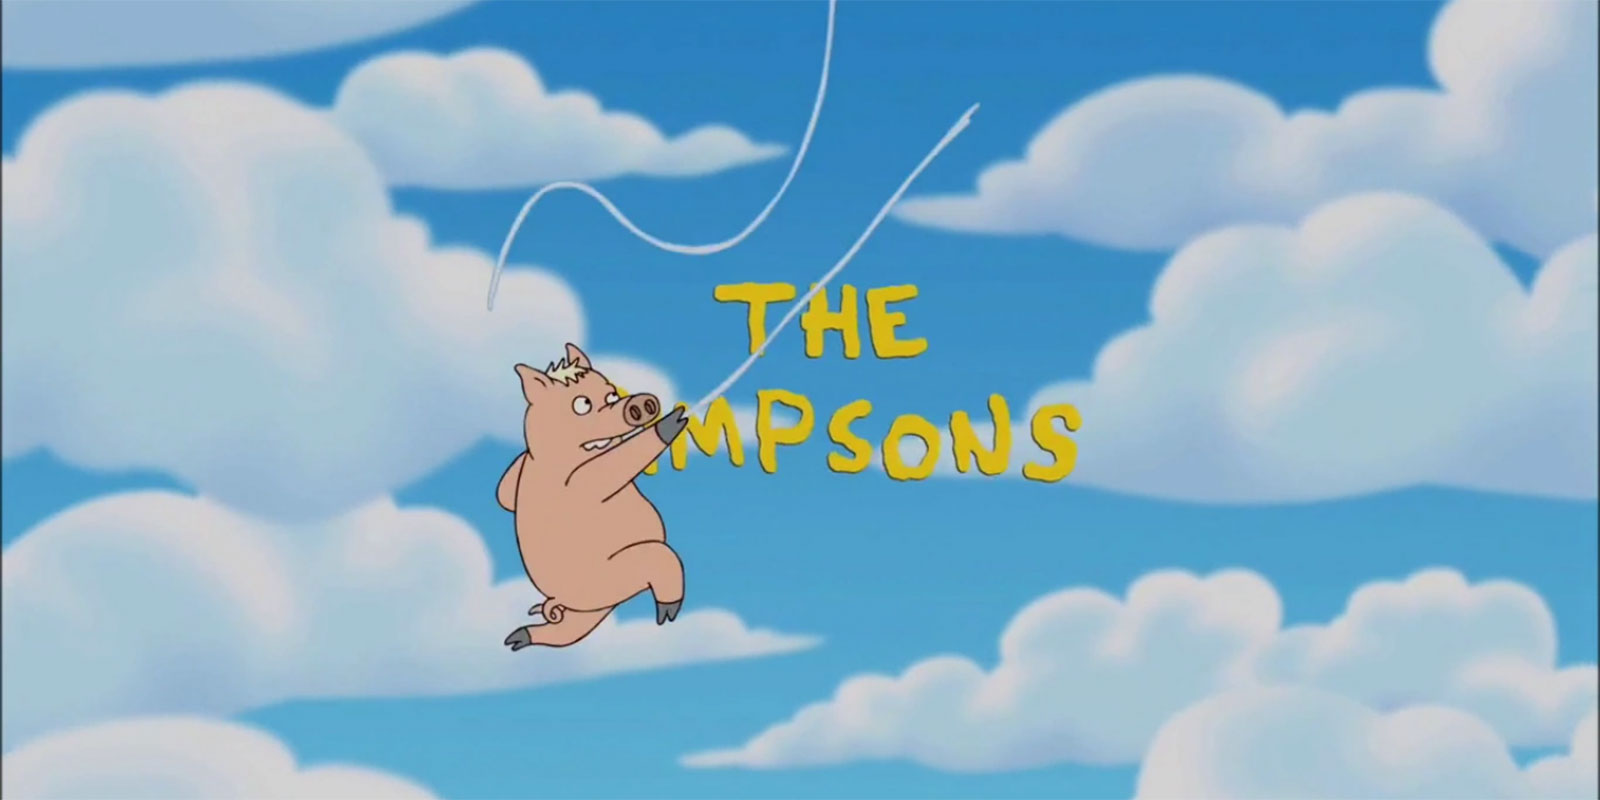 11 Subtleties I Like in the New Simpsons Opening Sequence